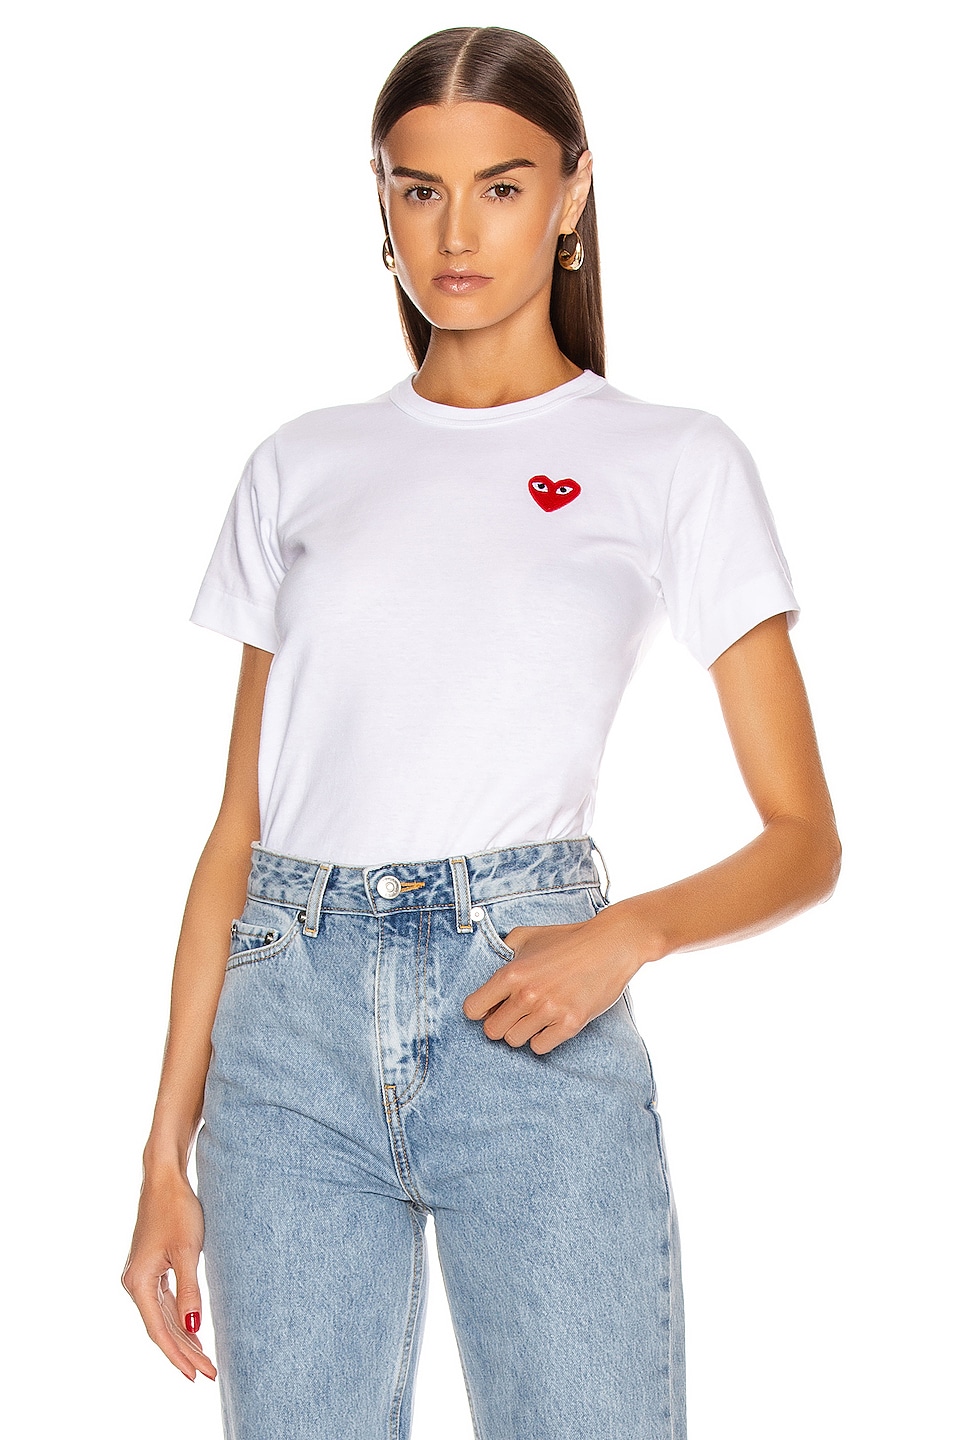 COMME des GARCONS PLAY Cotton Red Emblem Tee in White | FWRD